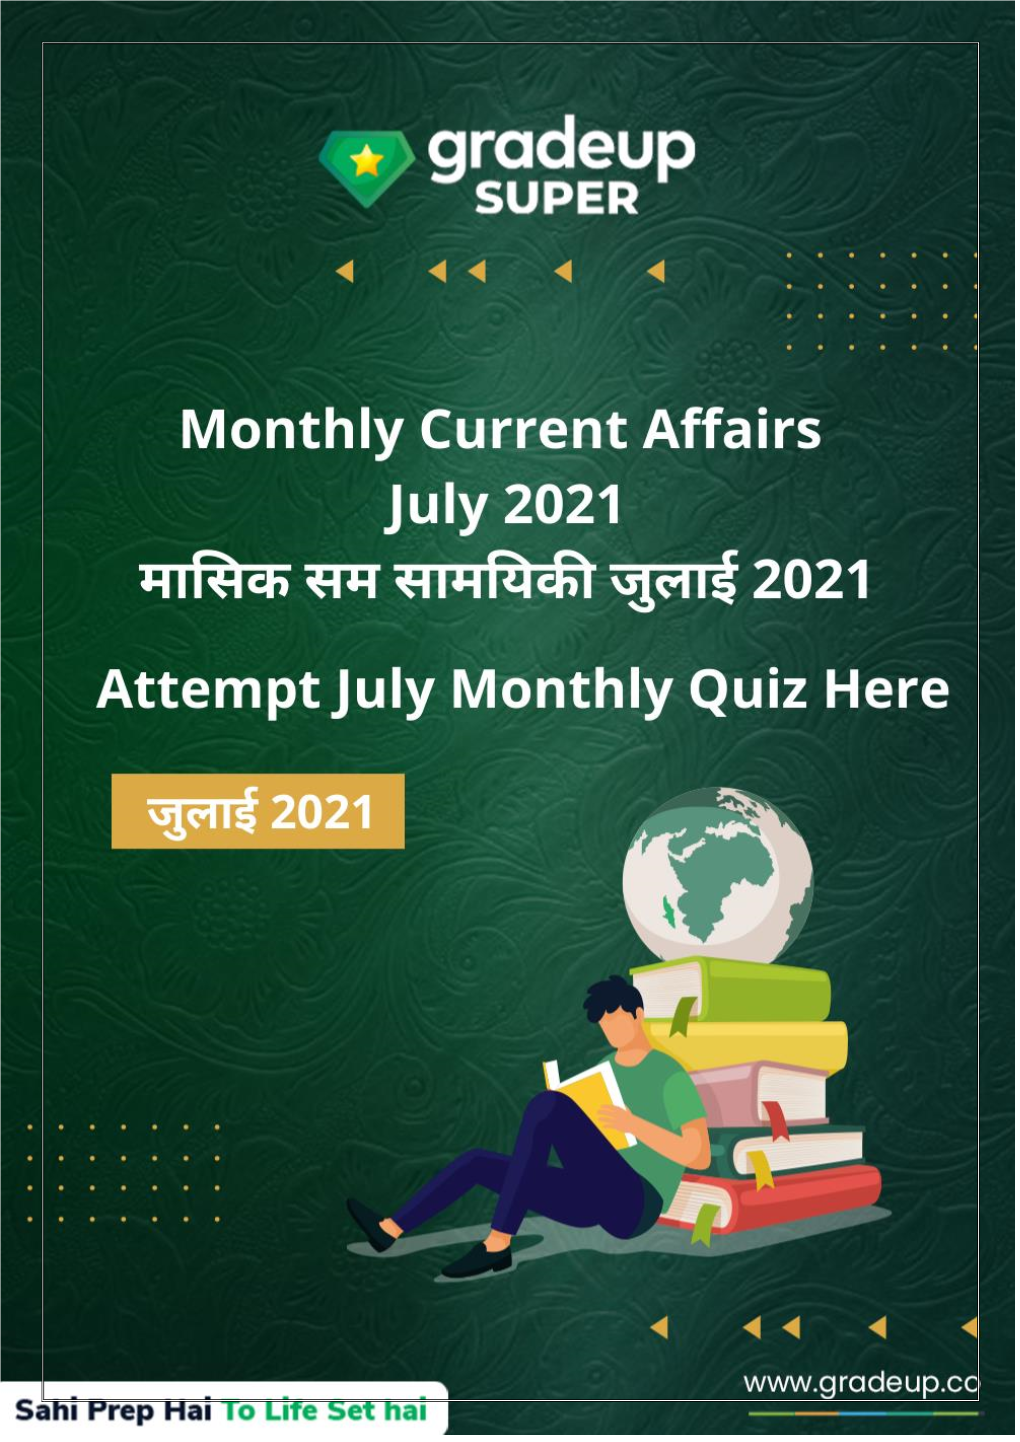 Monthly Current Affairs July 2021 मासिक िम सामयिकी जुलाई 2021